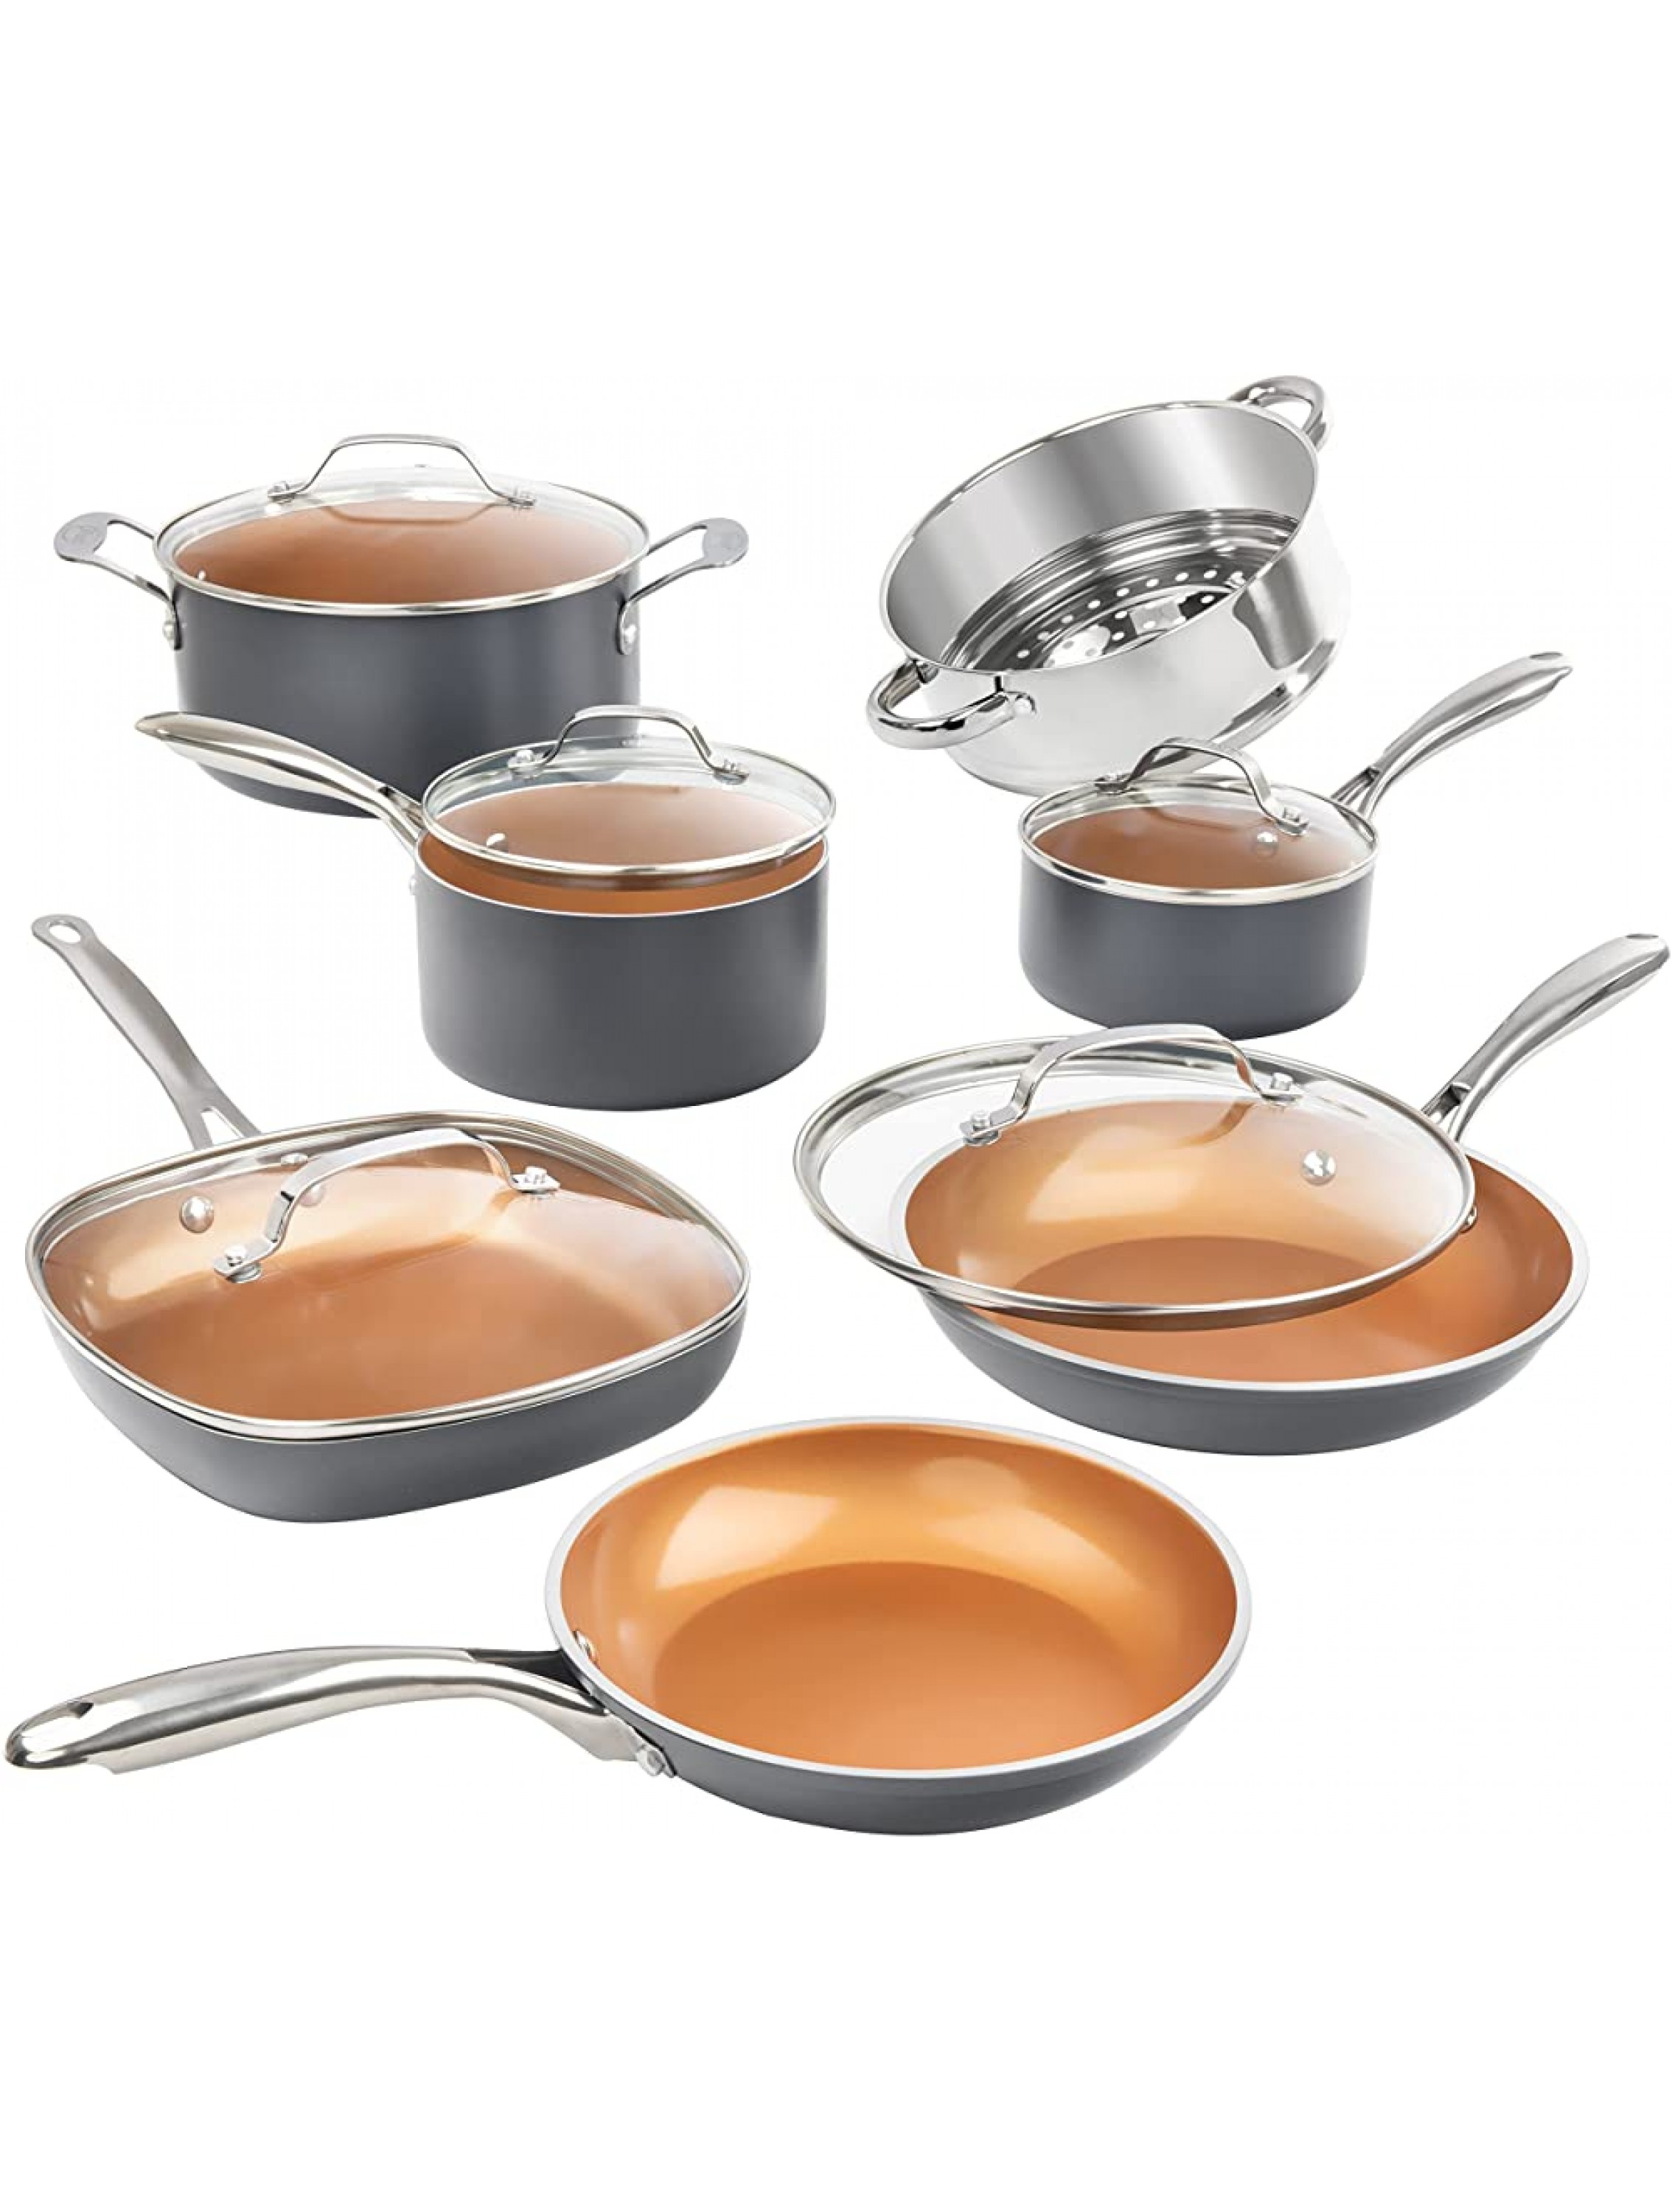 Gotham Steel Pots and Pans Set 12 Piece Cookware Set with Ultra Nonstick Ceramic Coating by Chef Daniel Green 100% PFOA Free Stay Cool Handles Metal Utensil & Dishwasher Safe 2020 Edition - BLN6K4E68